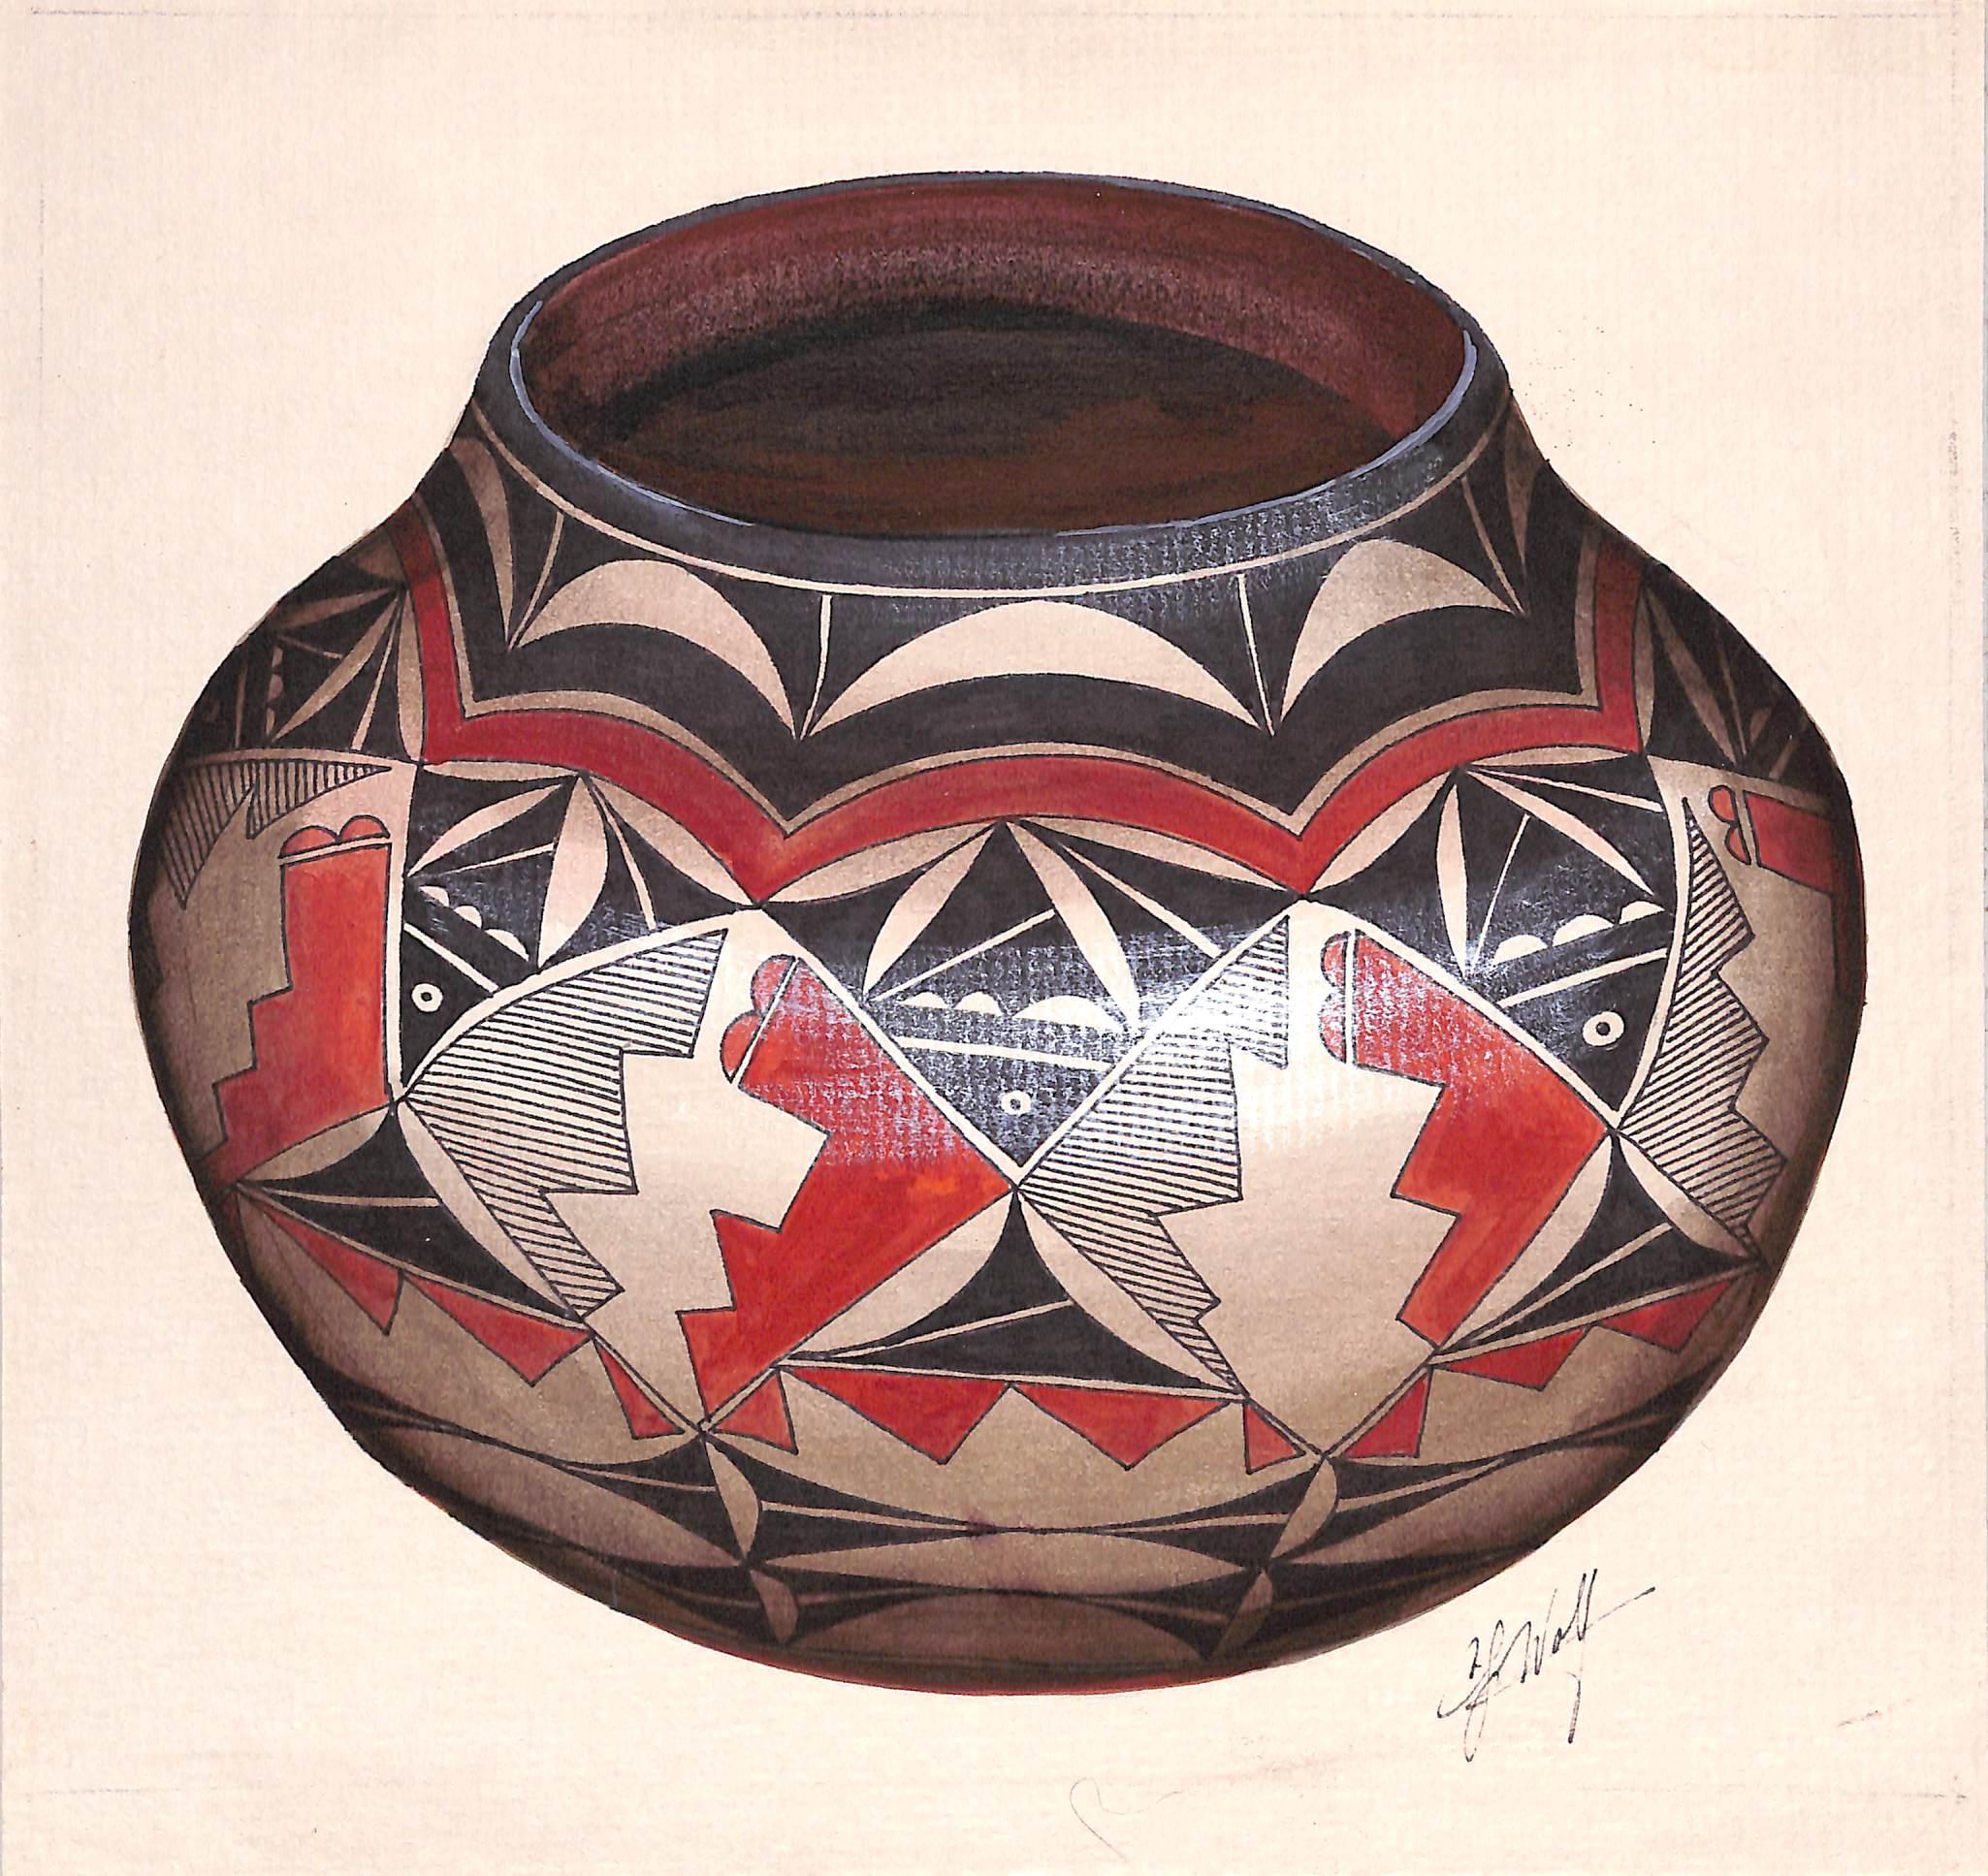 Sz: 9 3/4"H x 10 1/8"W

Acoma pottery dates back more than 1,000 years. Dense local clay, dug up at a nearby site, is essential to Acoma pottery. The clay is dried and strengthened by the addition of pulverized pottery shards. The pieces then are